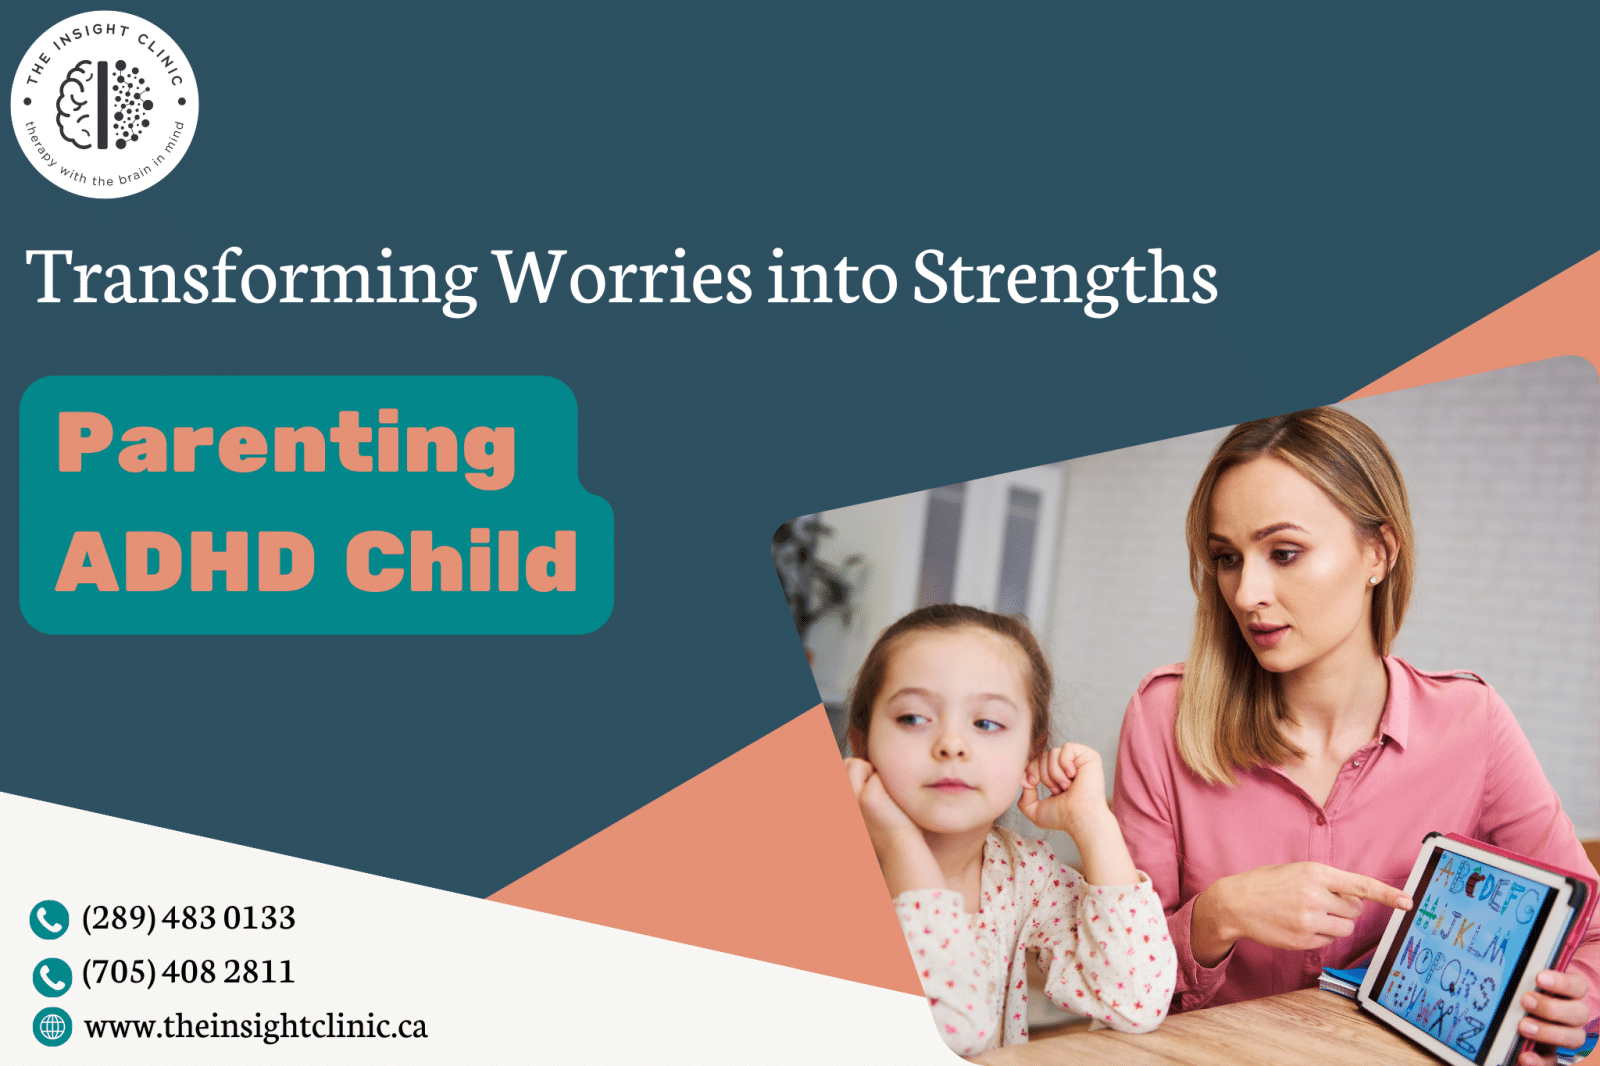 Transforming Worries into Strengths: Parenting an ADHD Child - The Insight Clinic